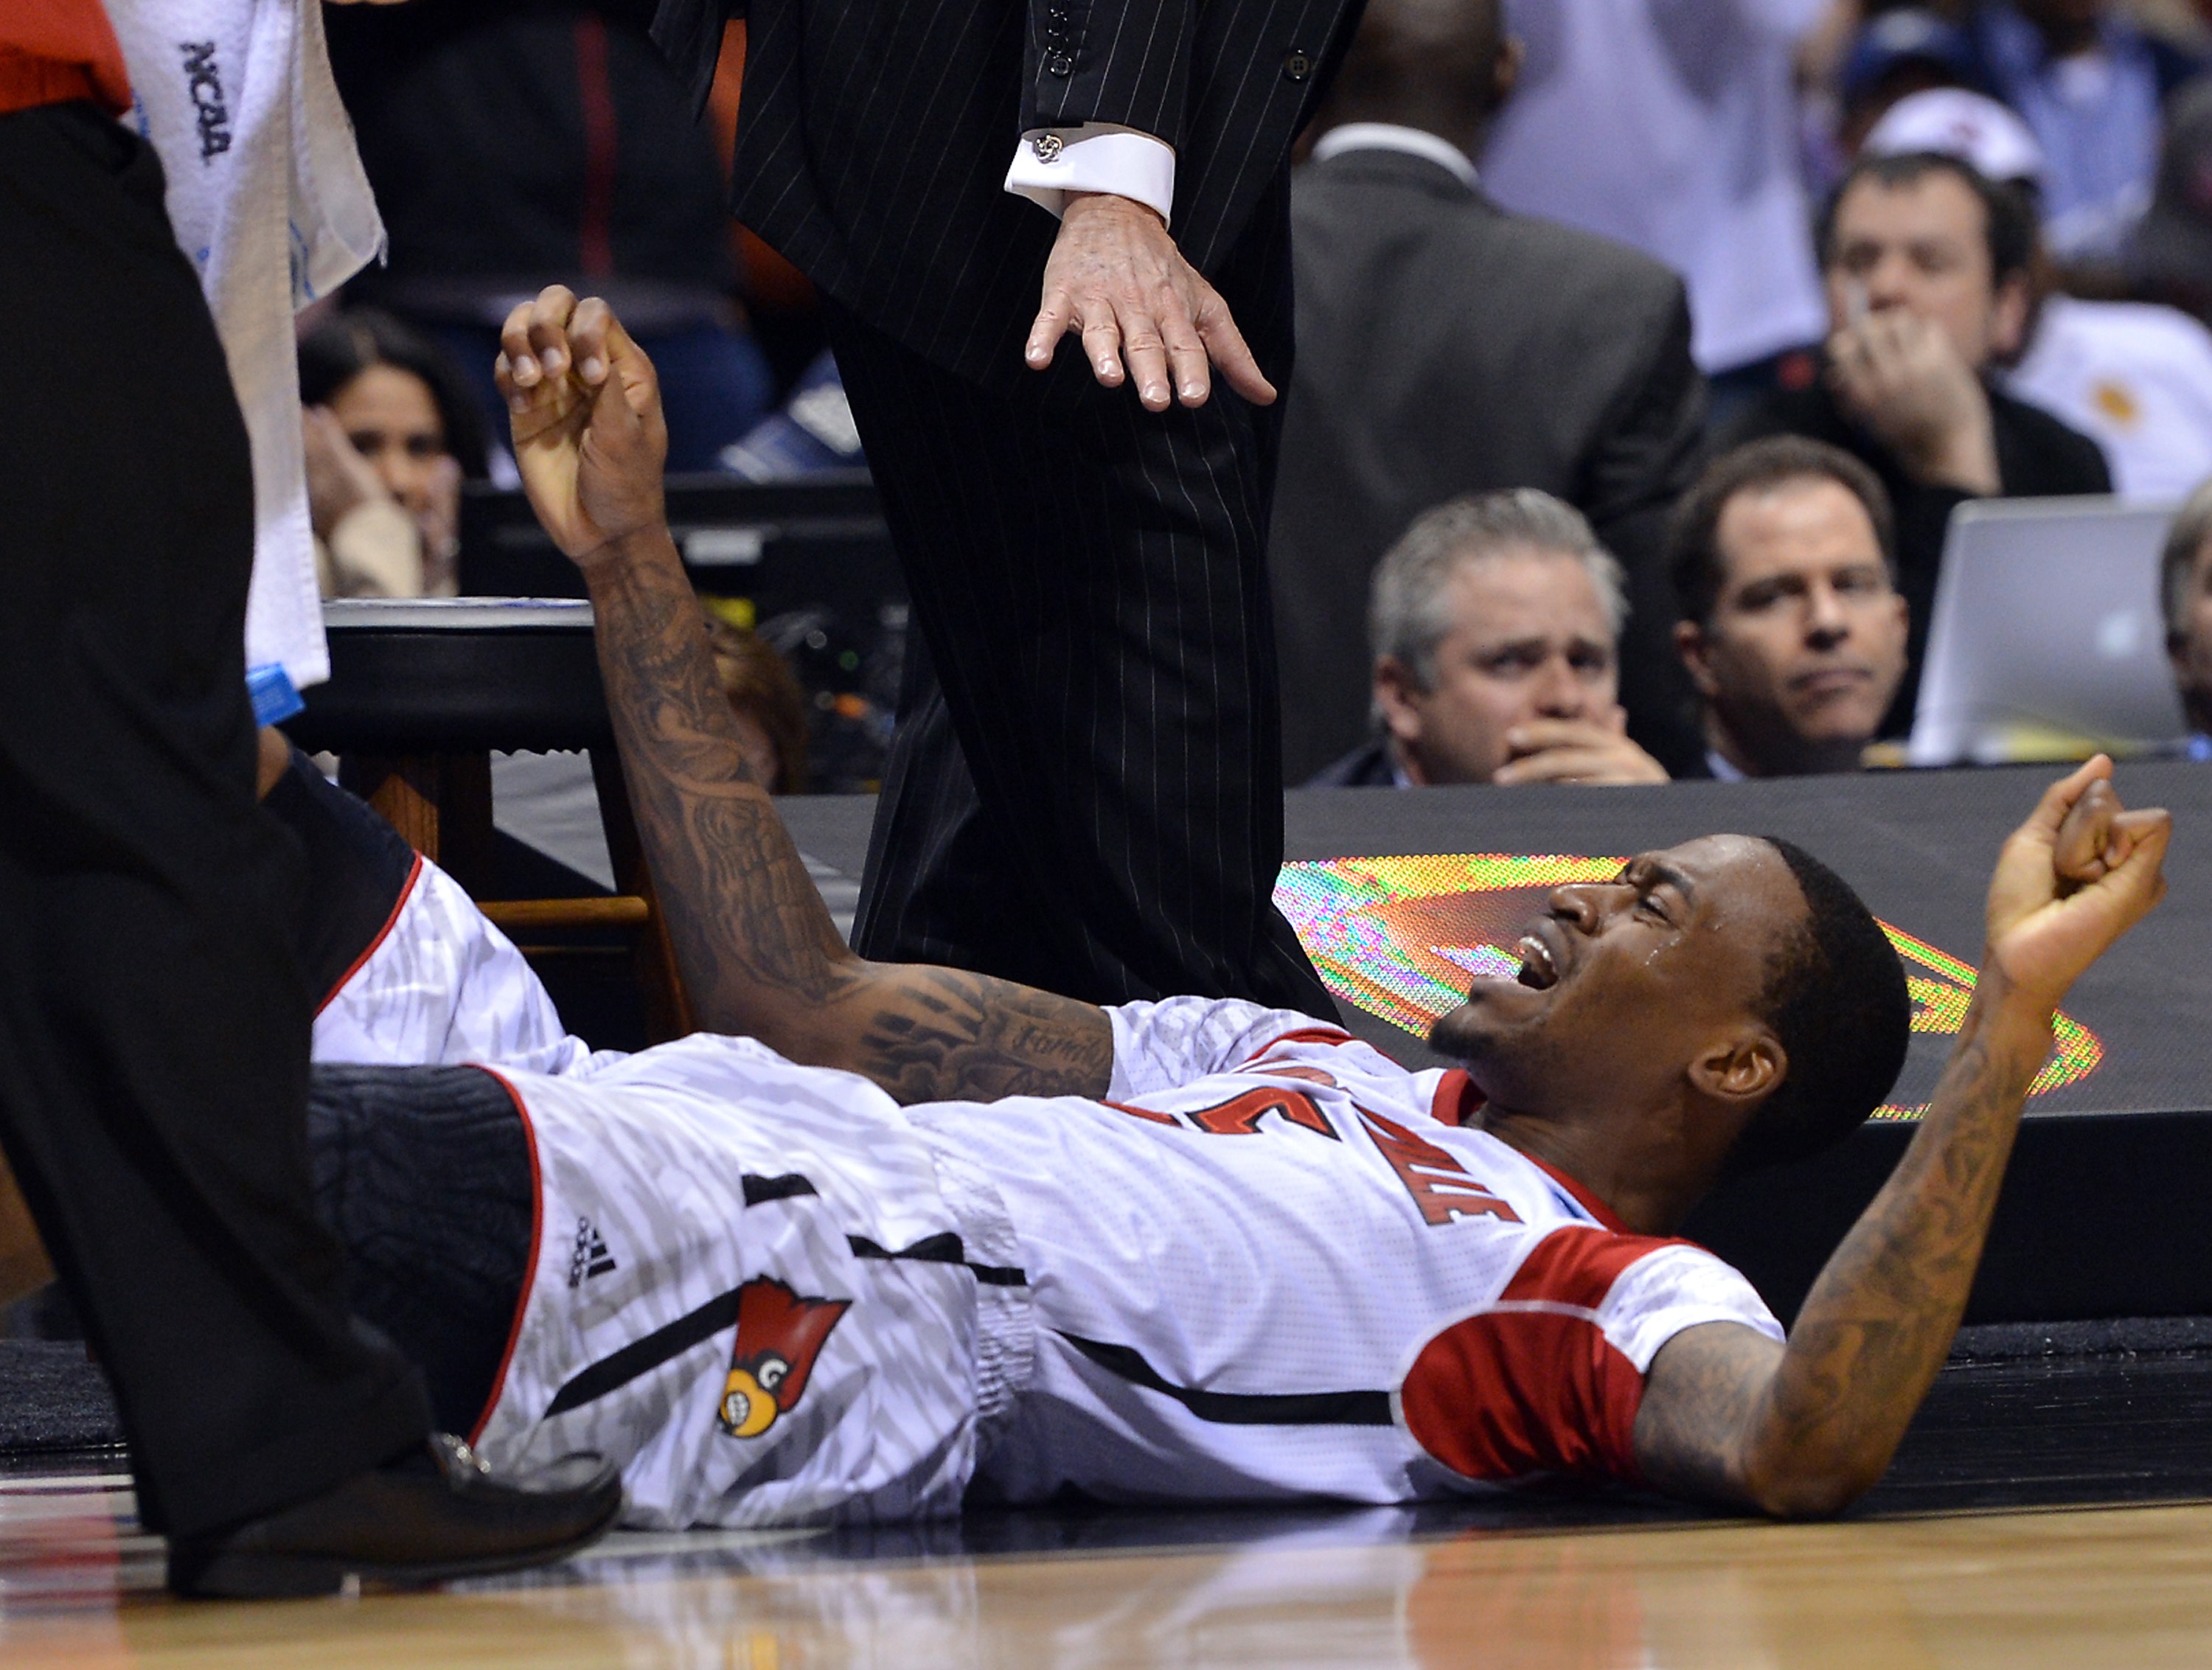 Kevin Ware's Awful Break: How Could It Happen? | TIME.com